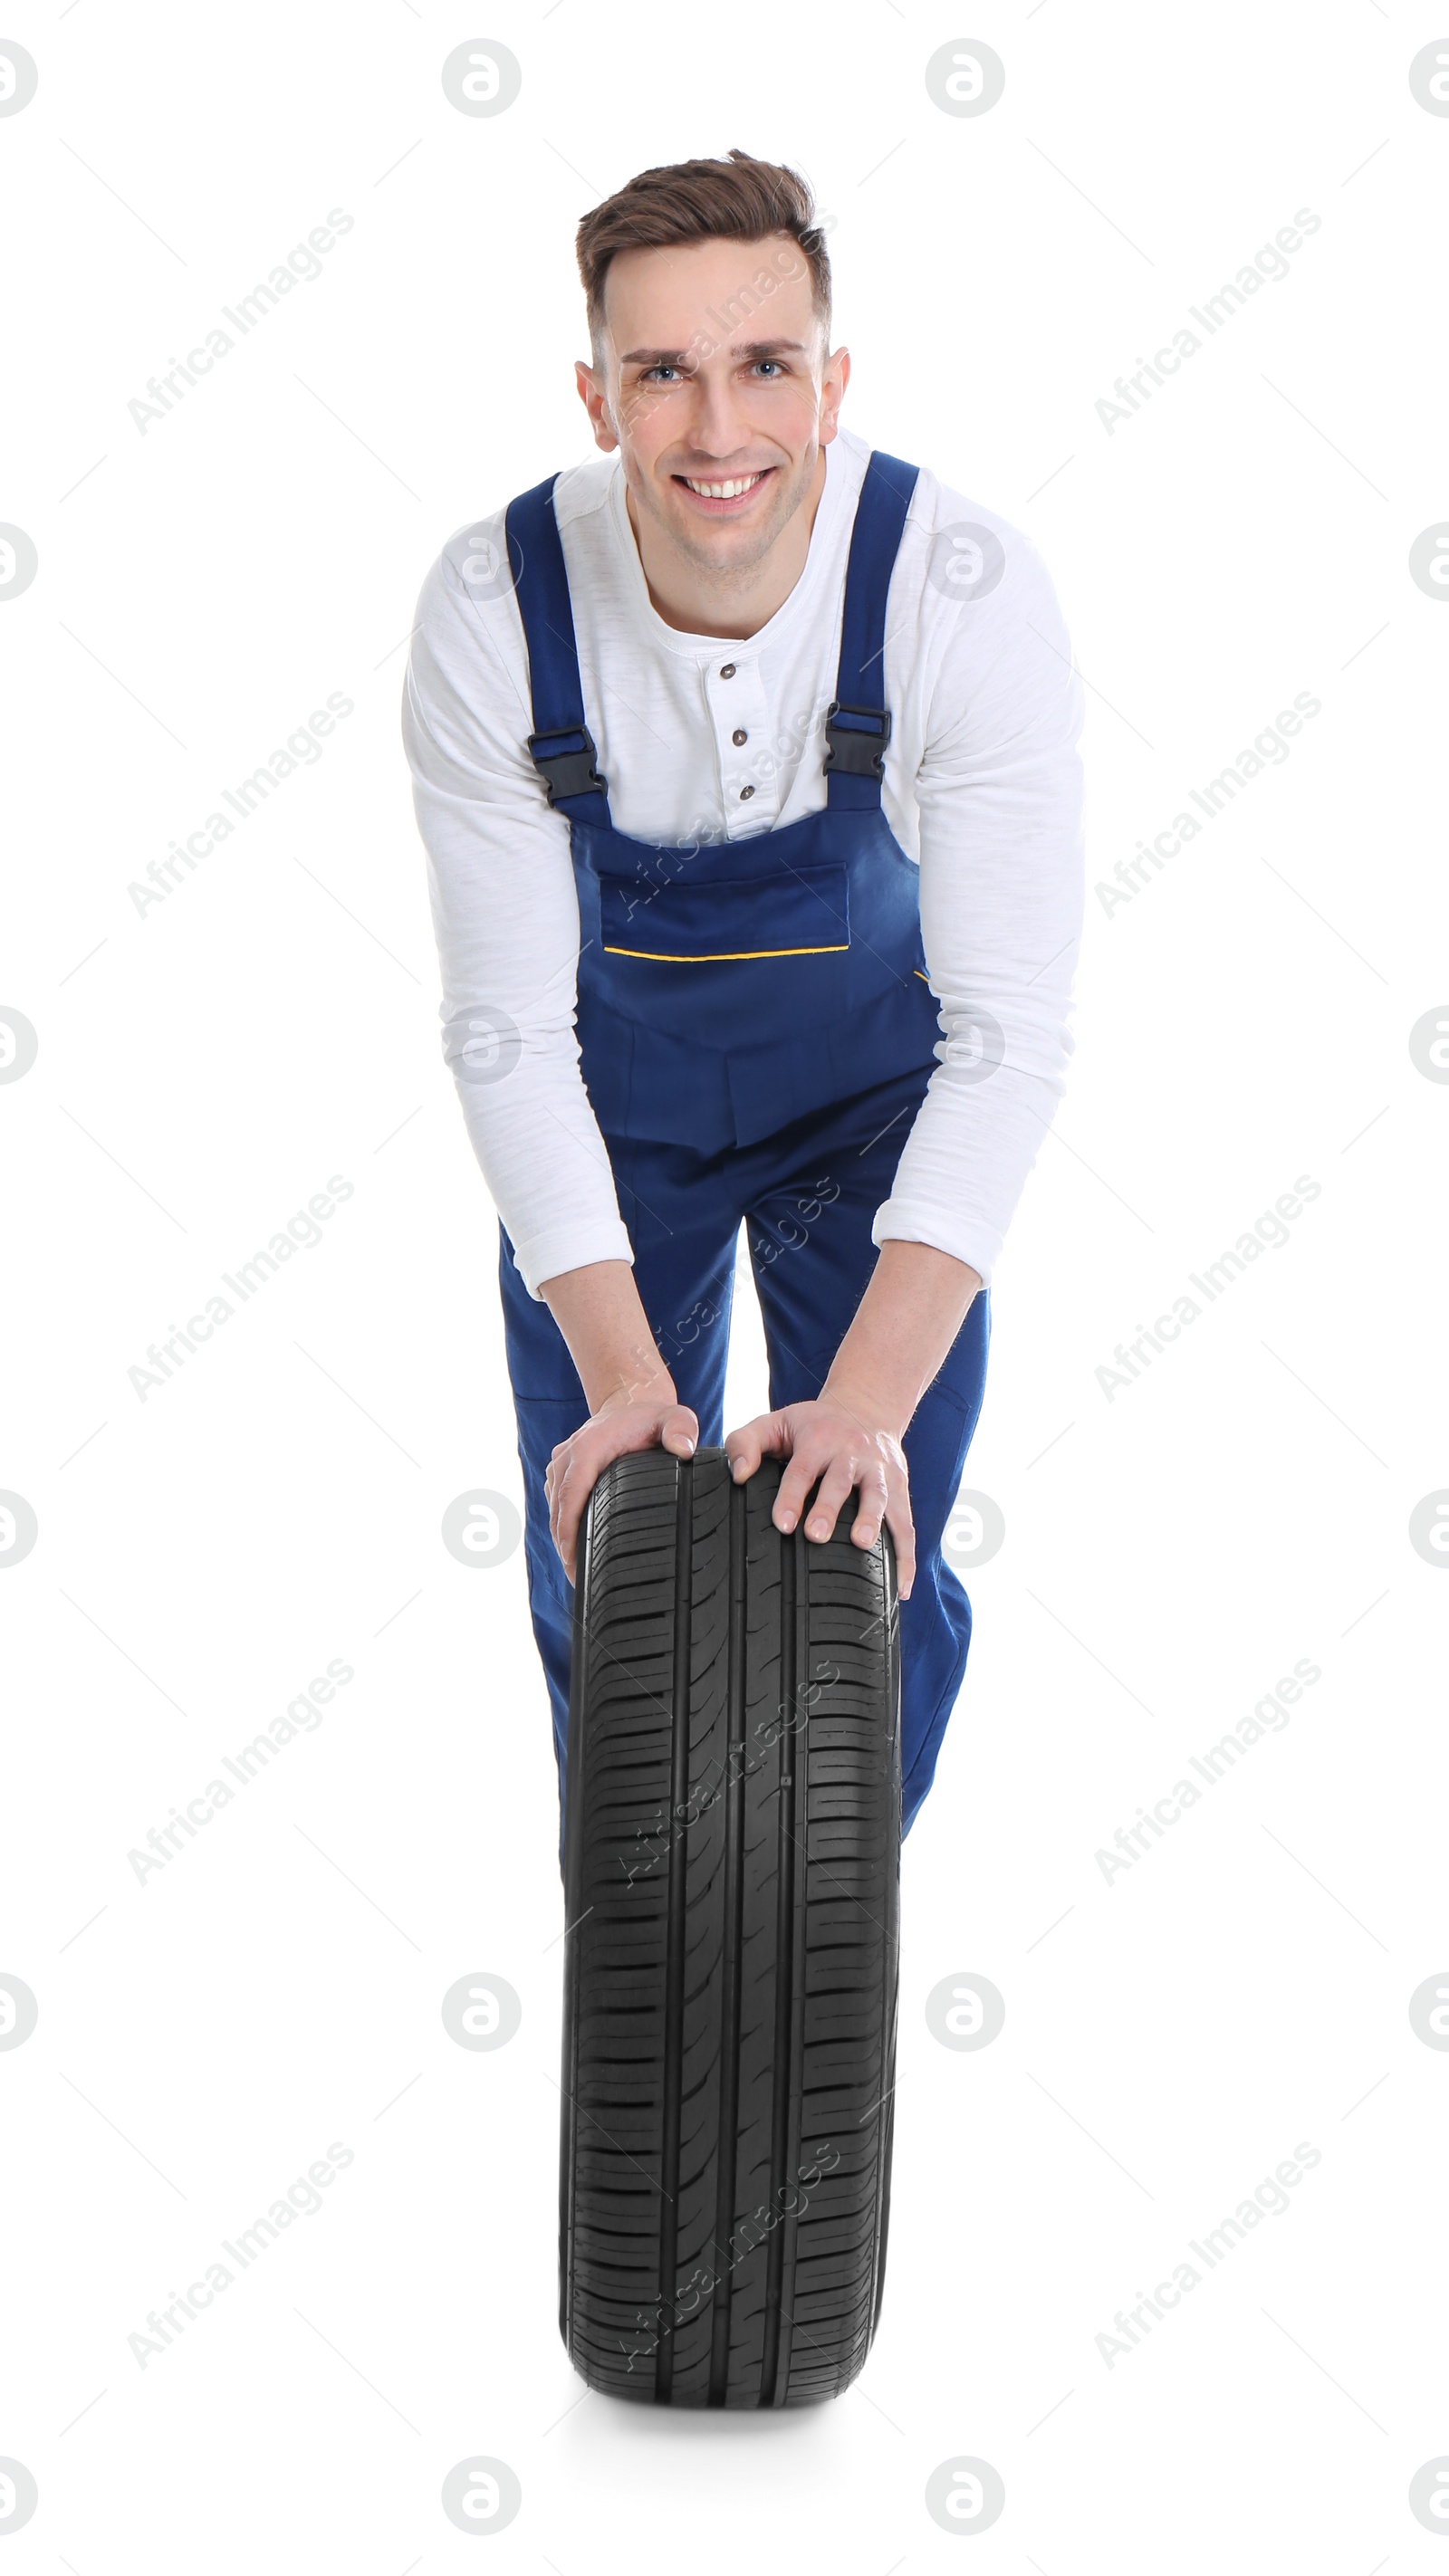 Photo of Male mechanic with car tire on white background